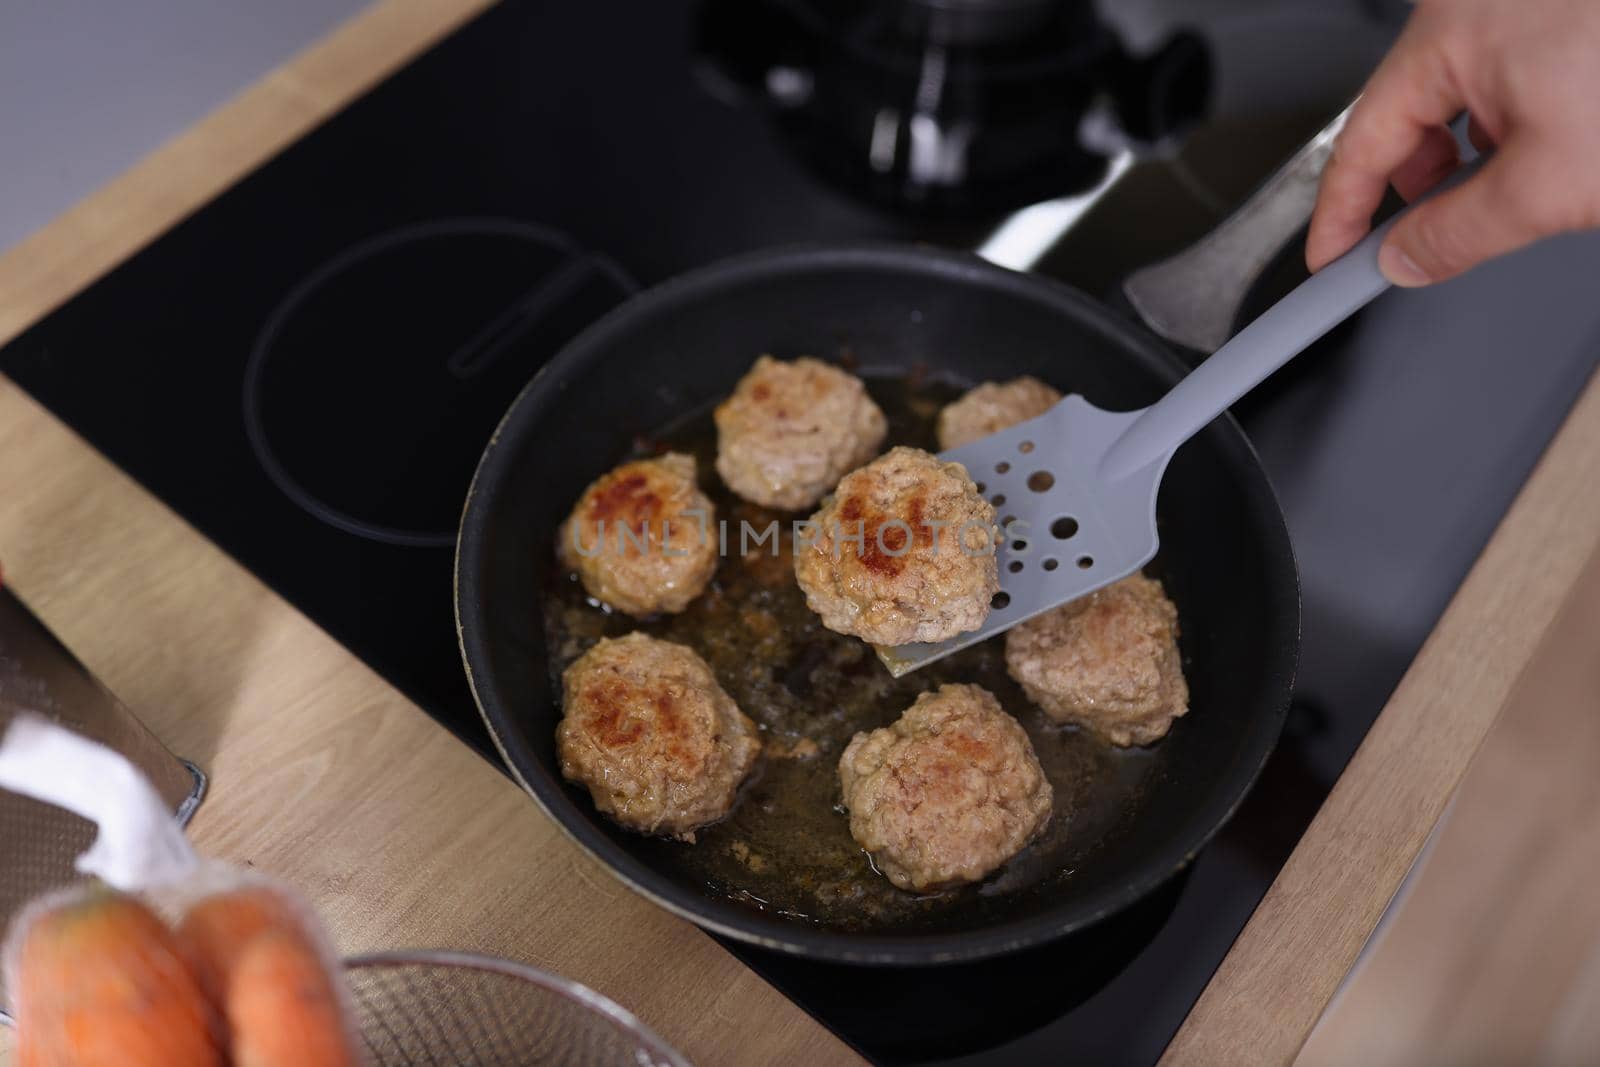 Top view of meat balls beginning to fry in oil in frying pan on kitchen stove. Housewife cooking fresh meal using tool. Chef, food, eating, dish concept